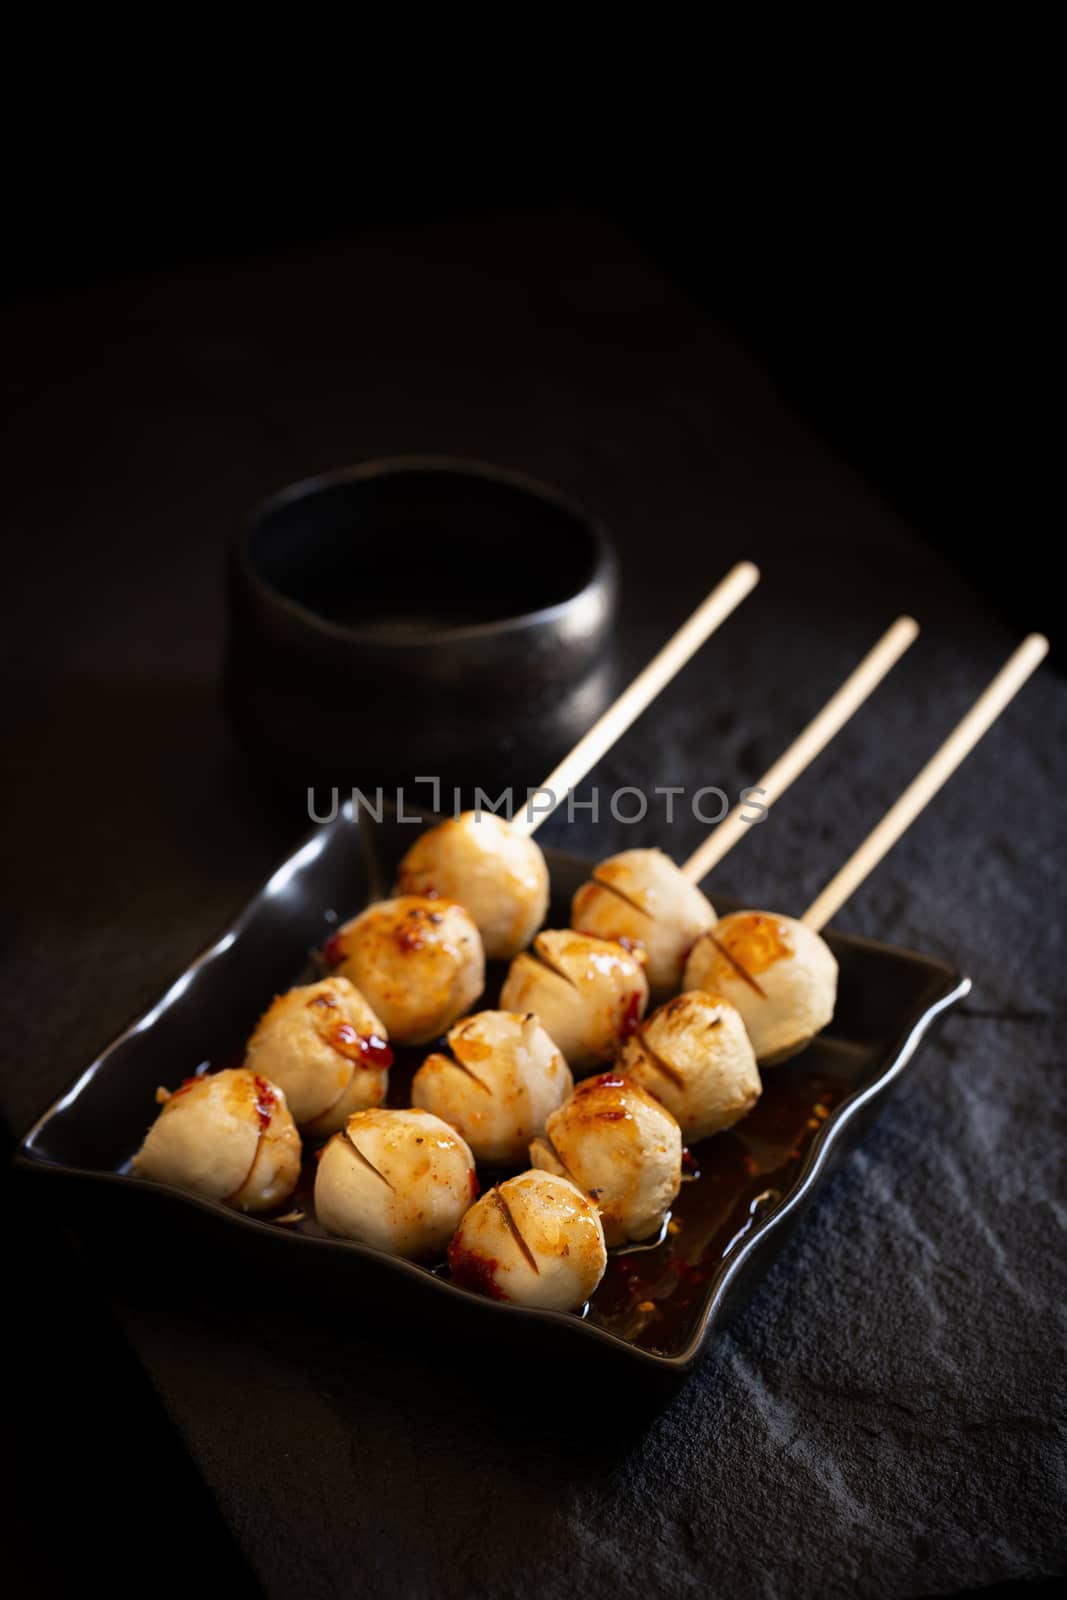 Roasted pork ball pour with sweet spicy sauce on dark background by kaiskynet